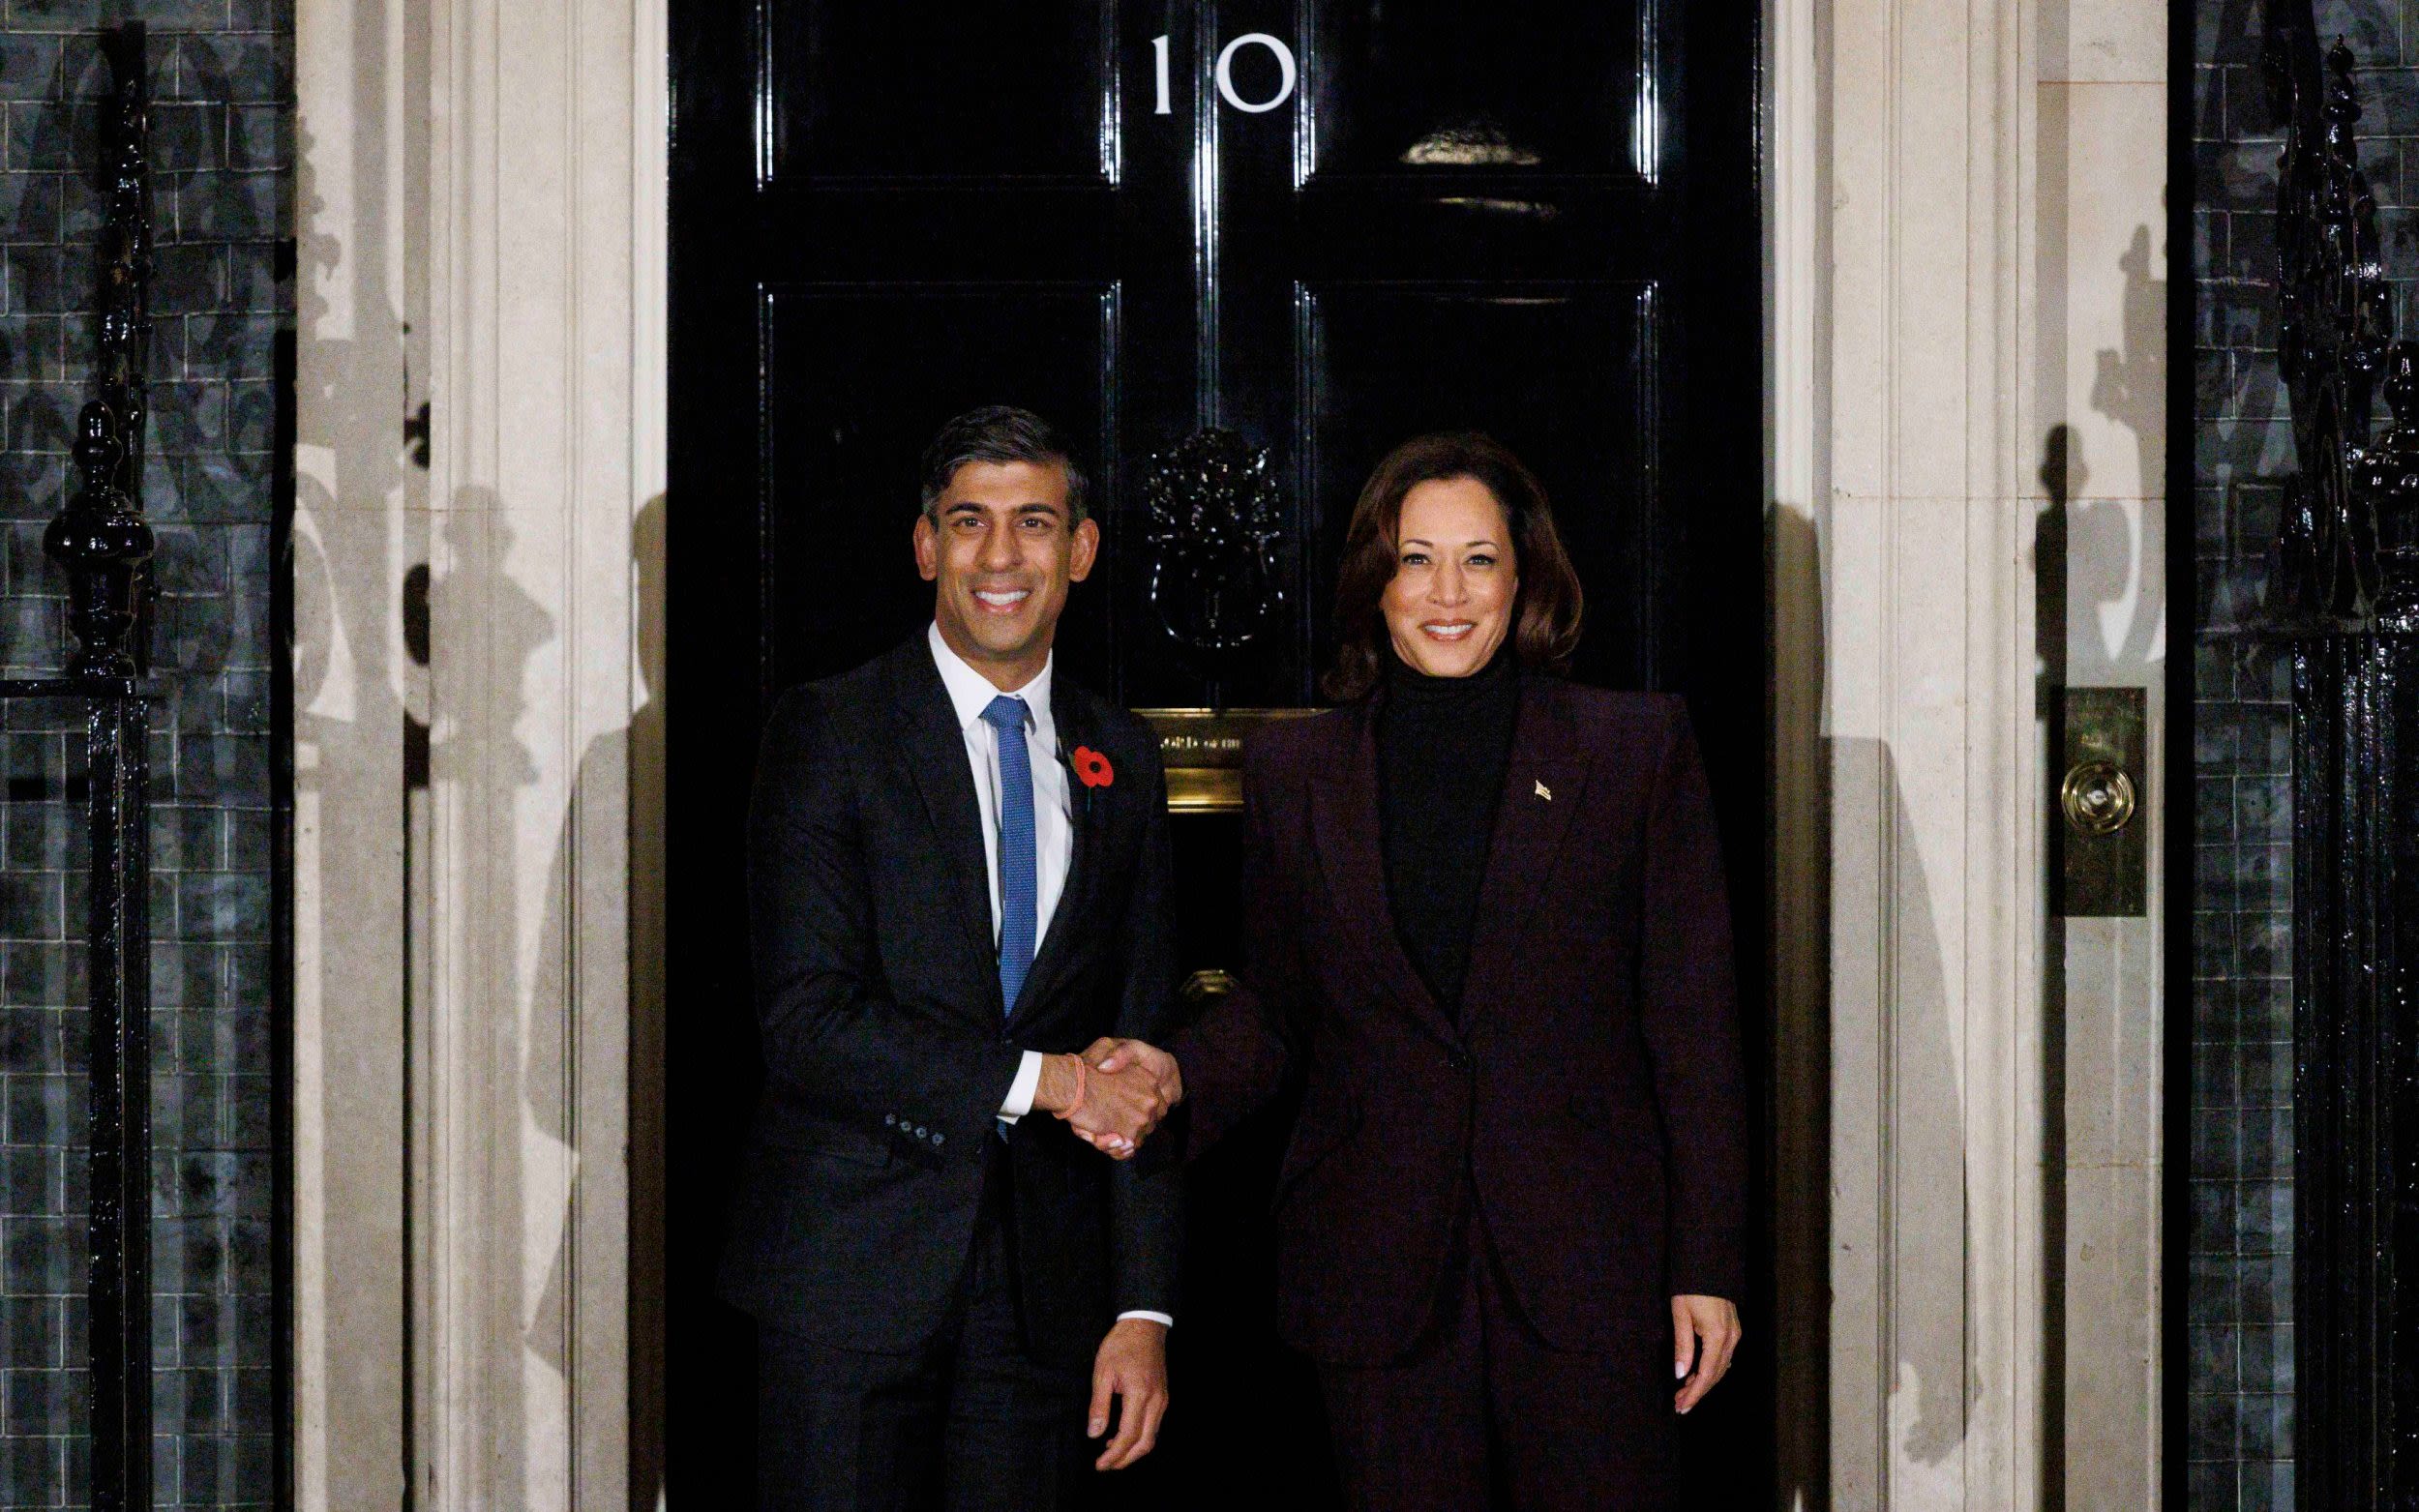 Kamala Harris ‘lacks star power’ say British officials who worked with her